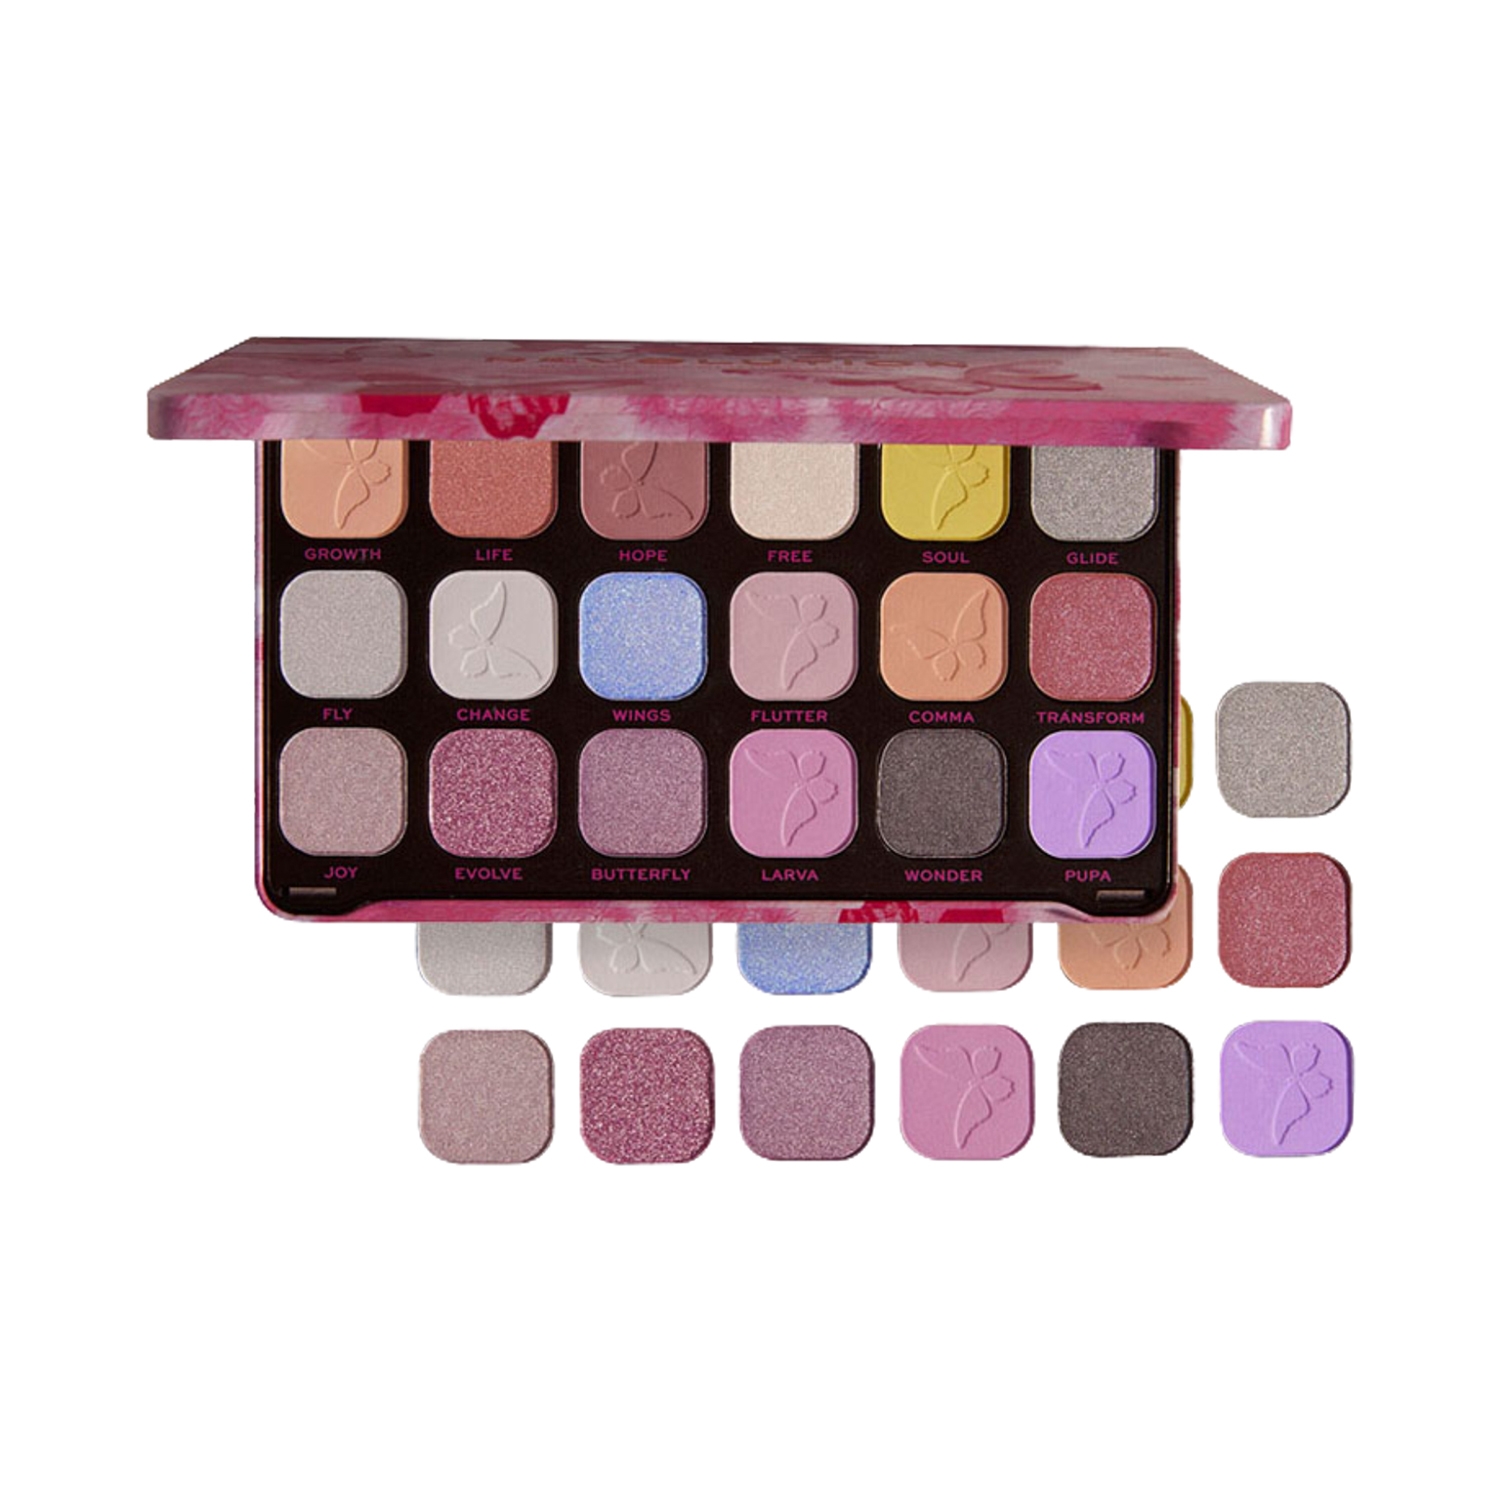 Makeup Revolution | Makeup Revolution Forever Flawless Eyeshadow Palette - Butterfly (19.8g)